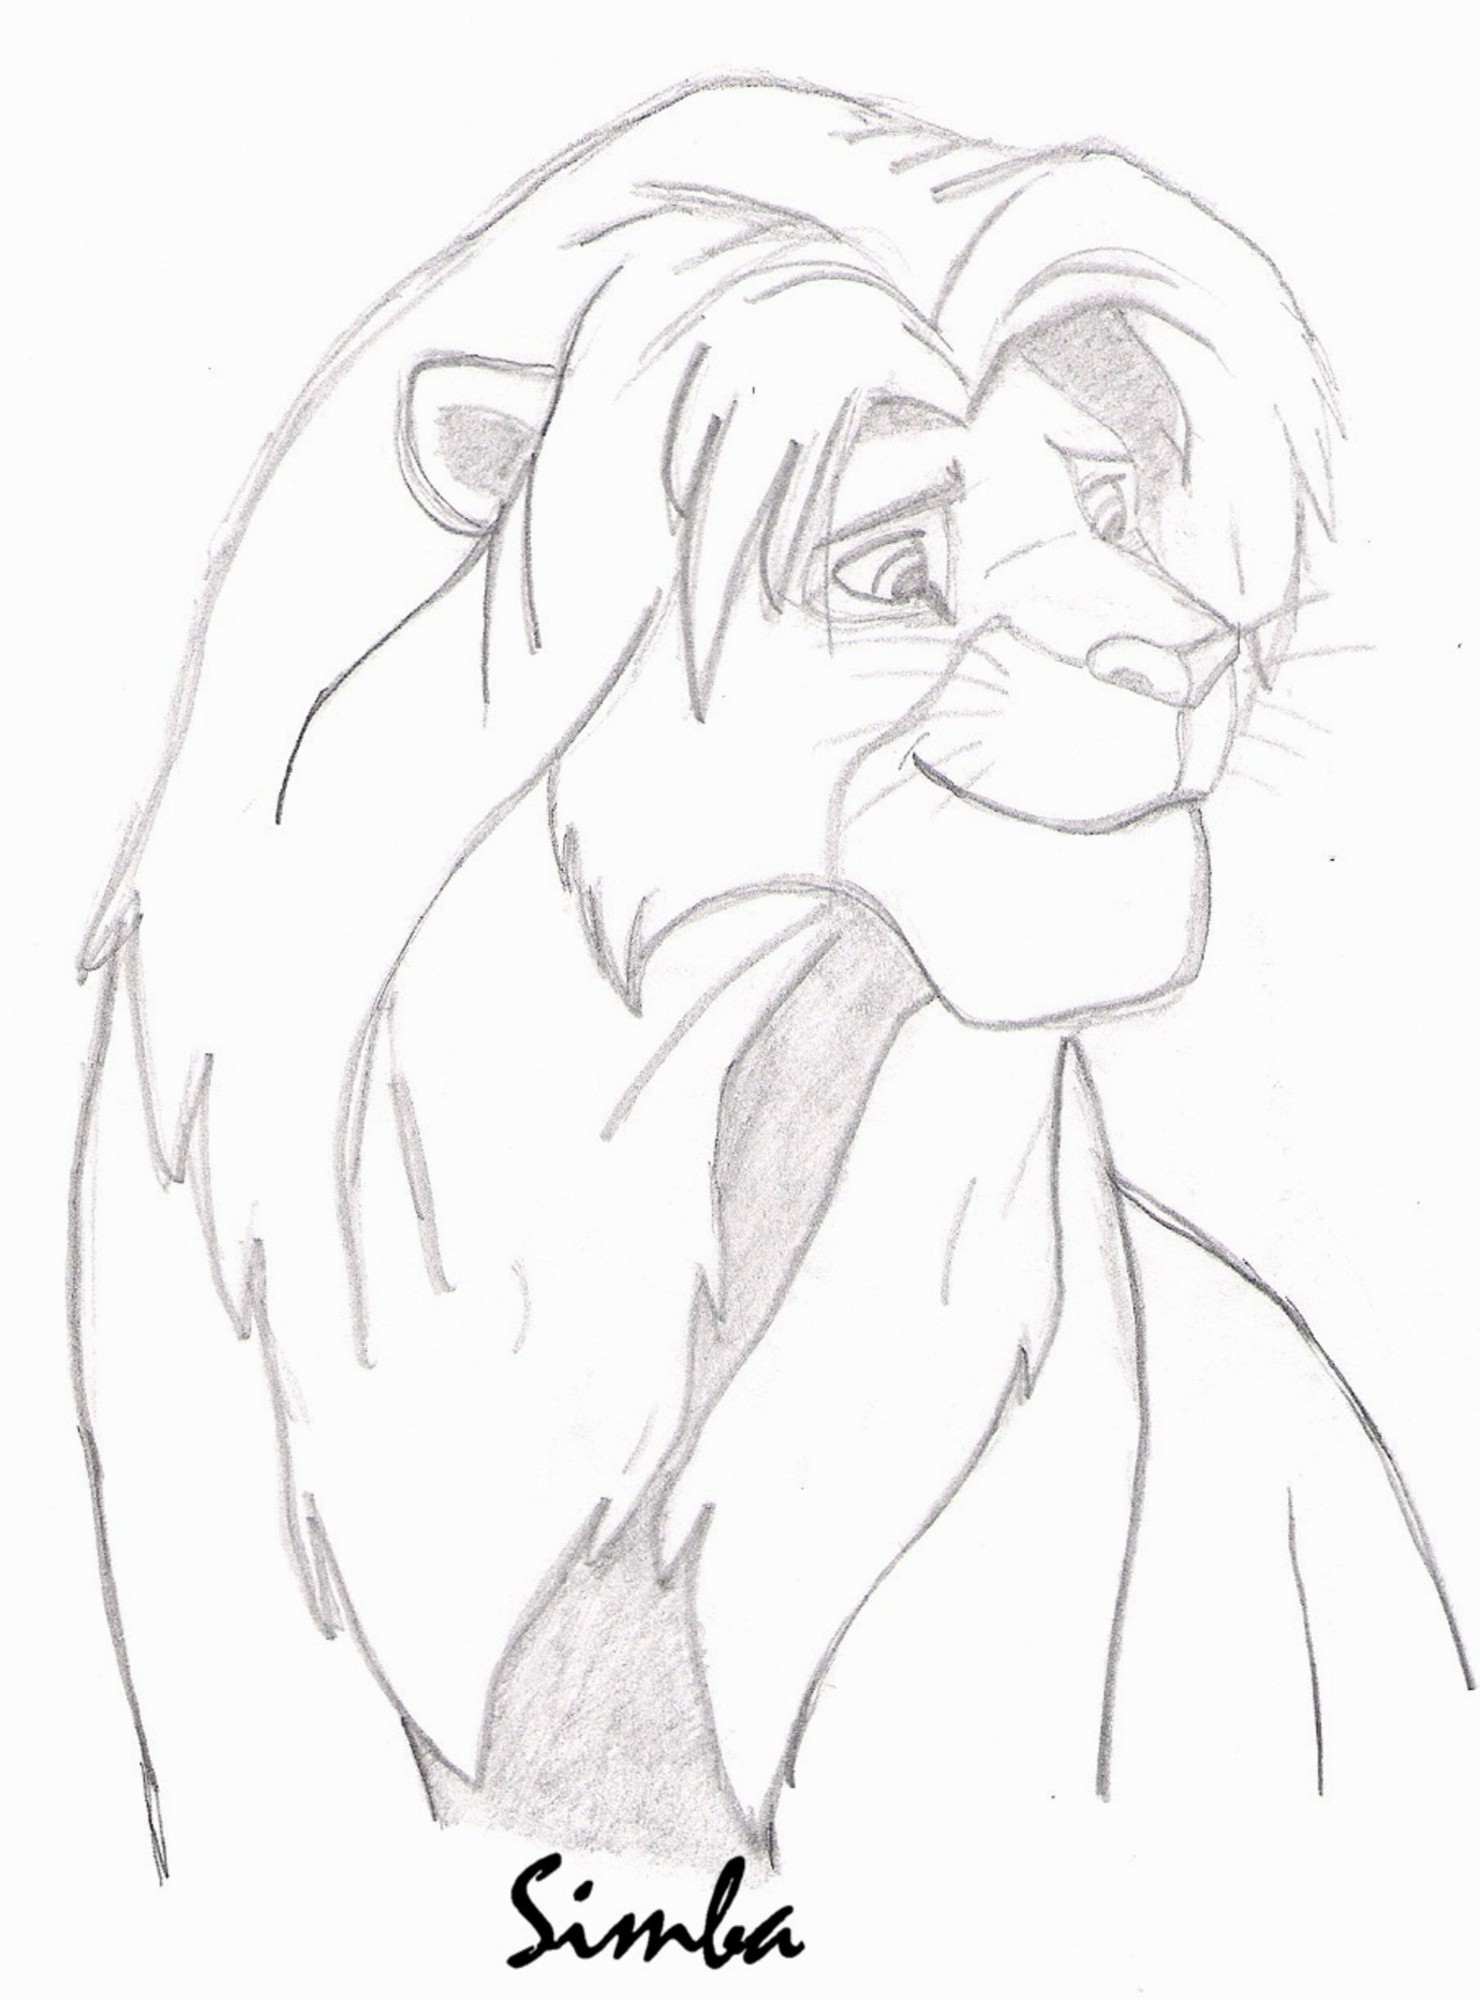 Simba by Mellow0417